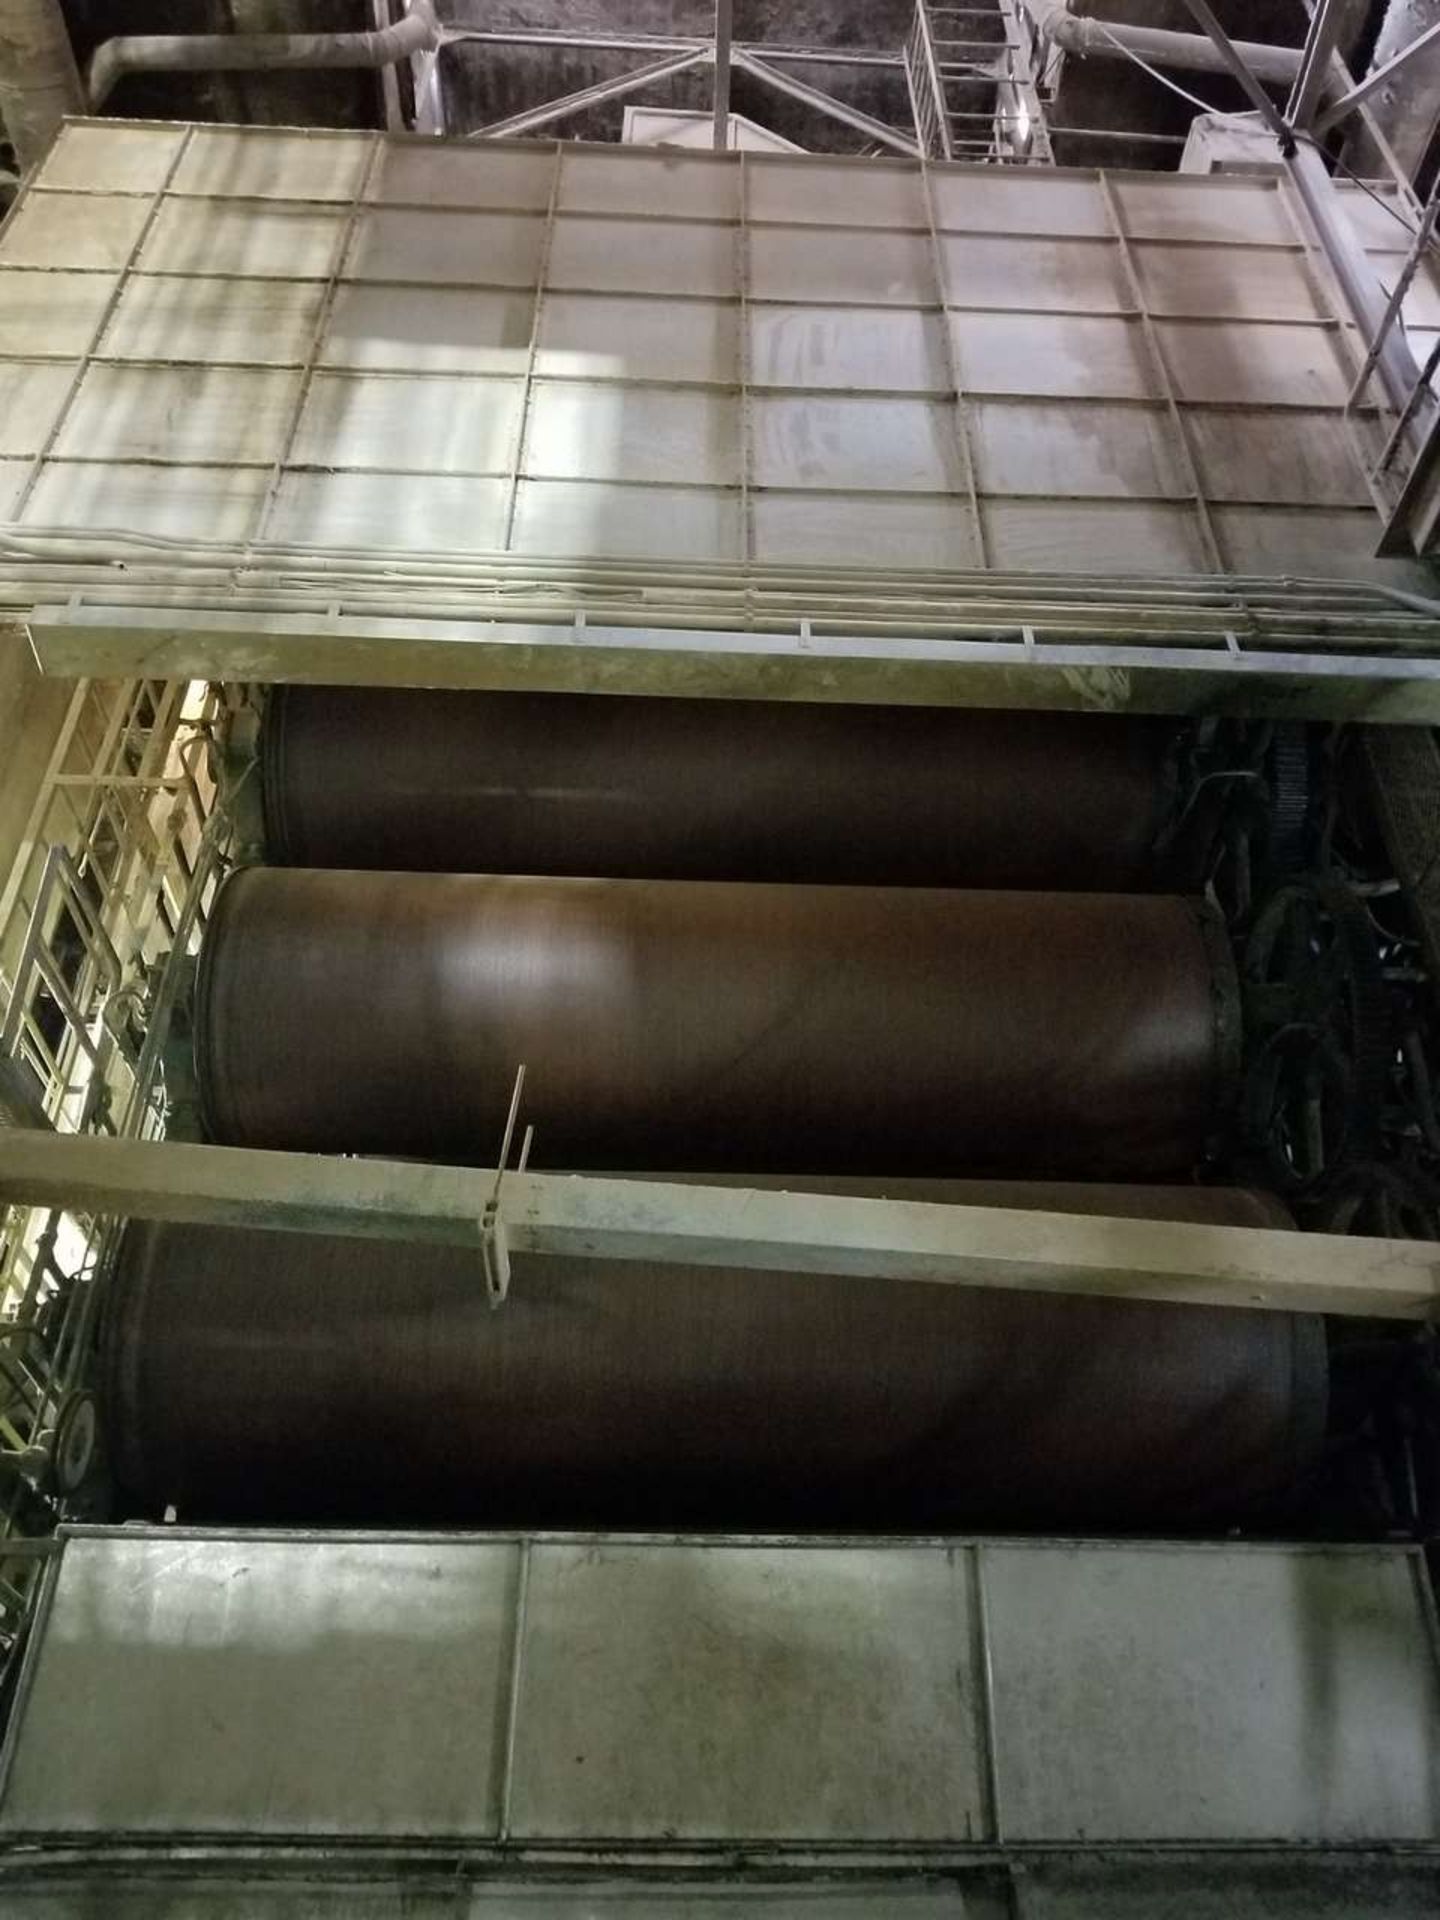 Black Clawson Dryer Can Section - Image 3 of 8